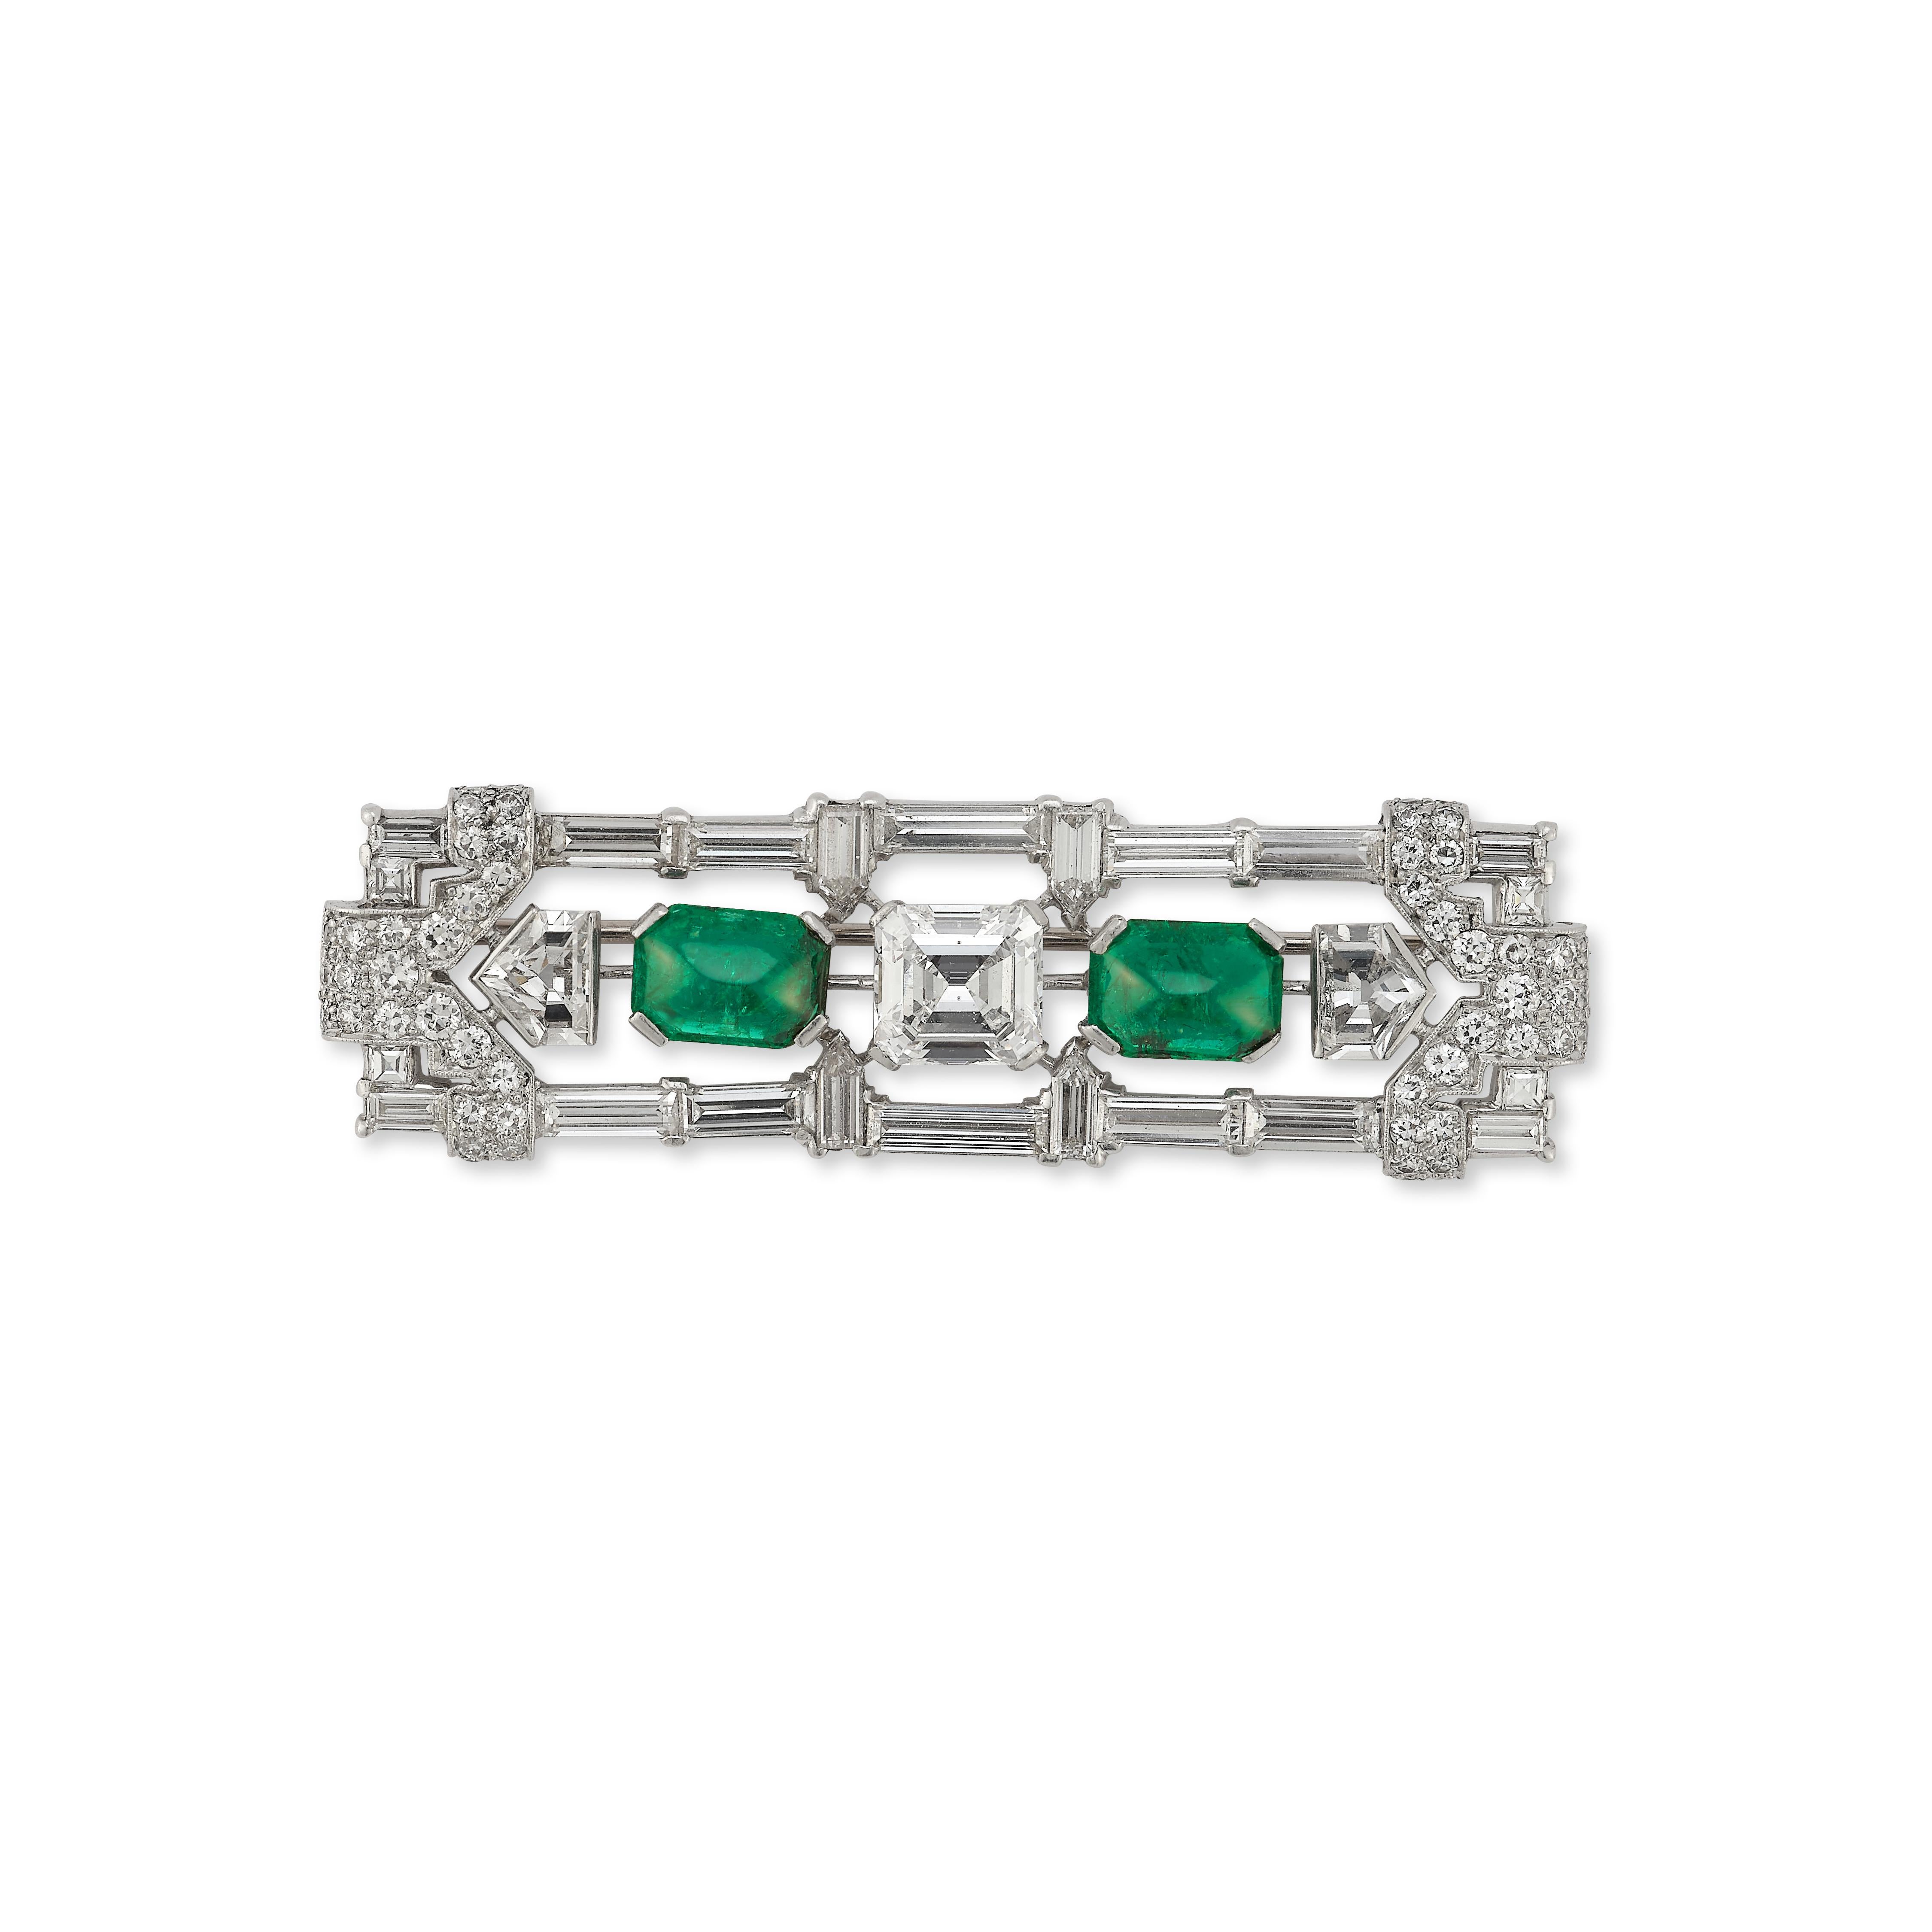 Art Deco Certified Cabochon Emerald & Diamond Brooch

A platinum brooch set with an emerald cut G colored diamond with a clarity grade of SI1 weighing 2.10 carats, 2 Colombian emeralds with insignificant treatment weighing a total of 2.91 carats,